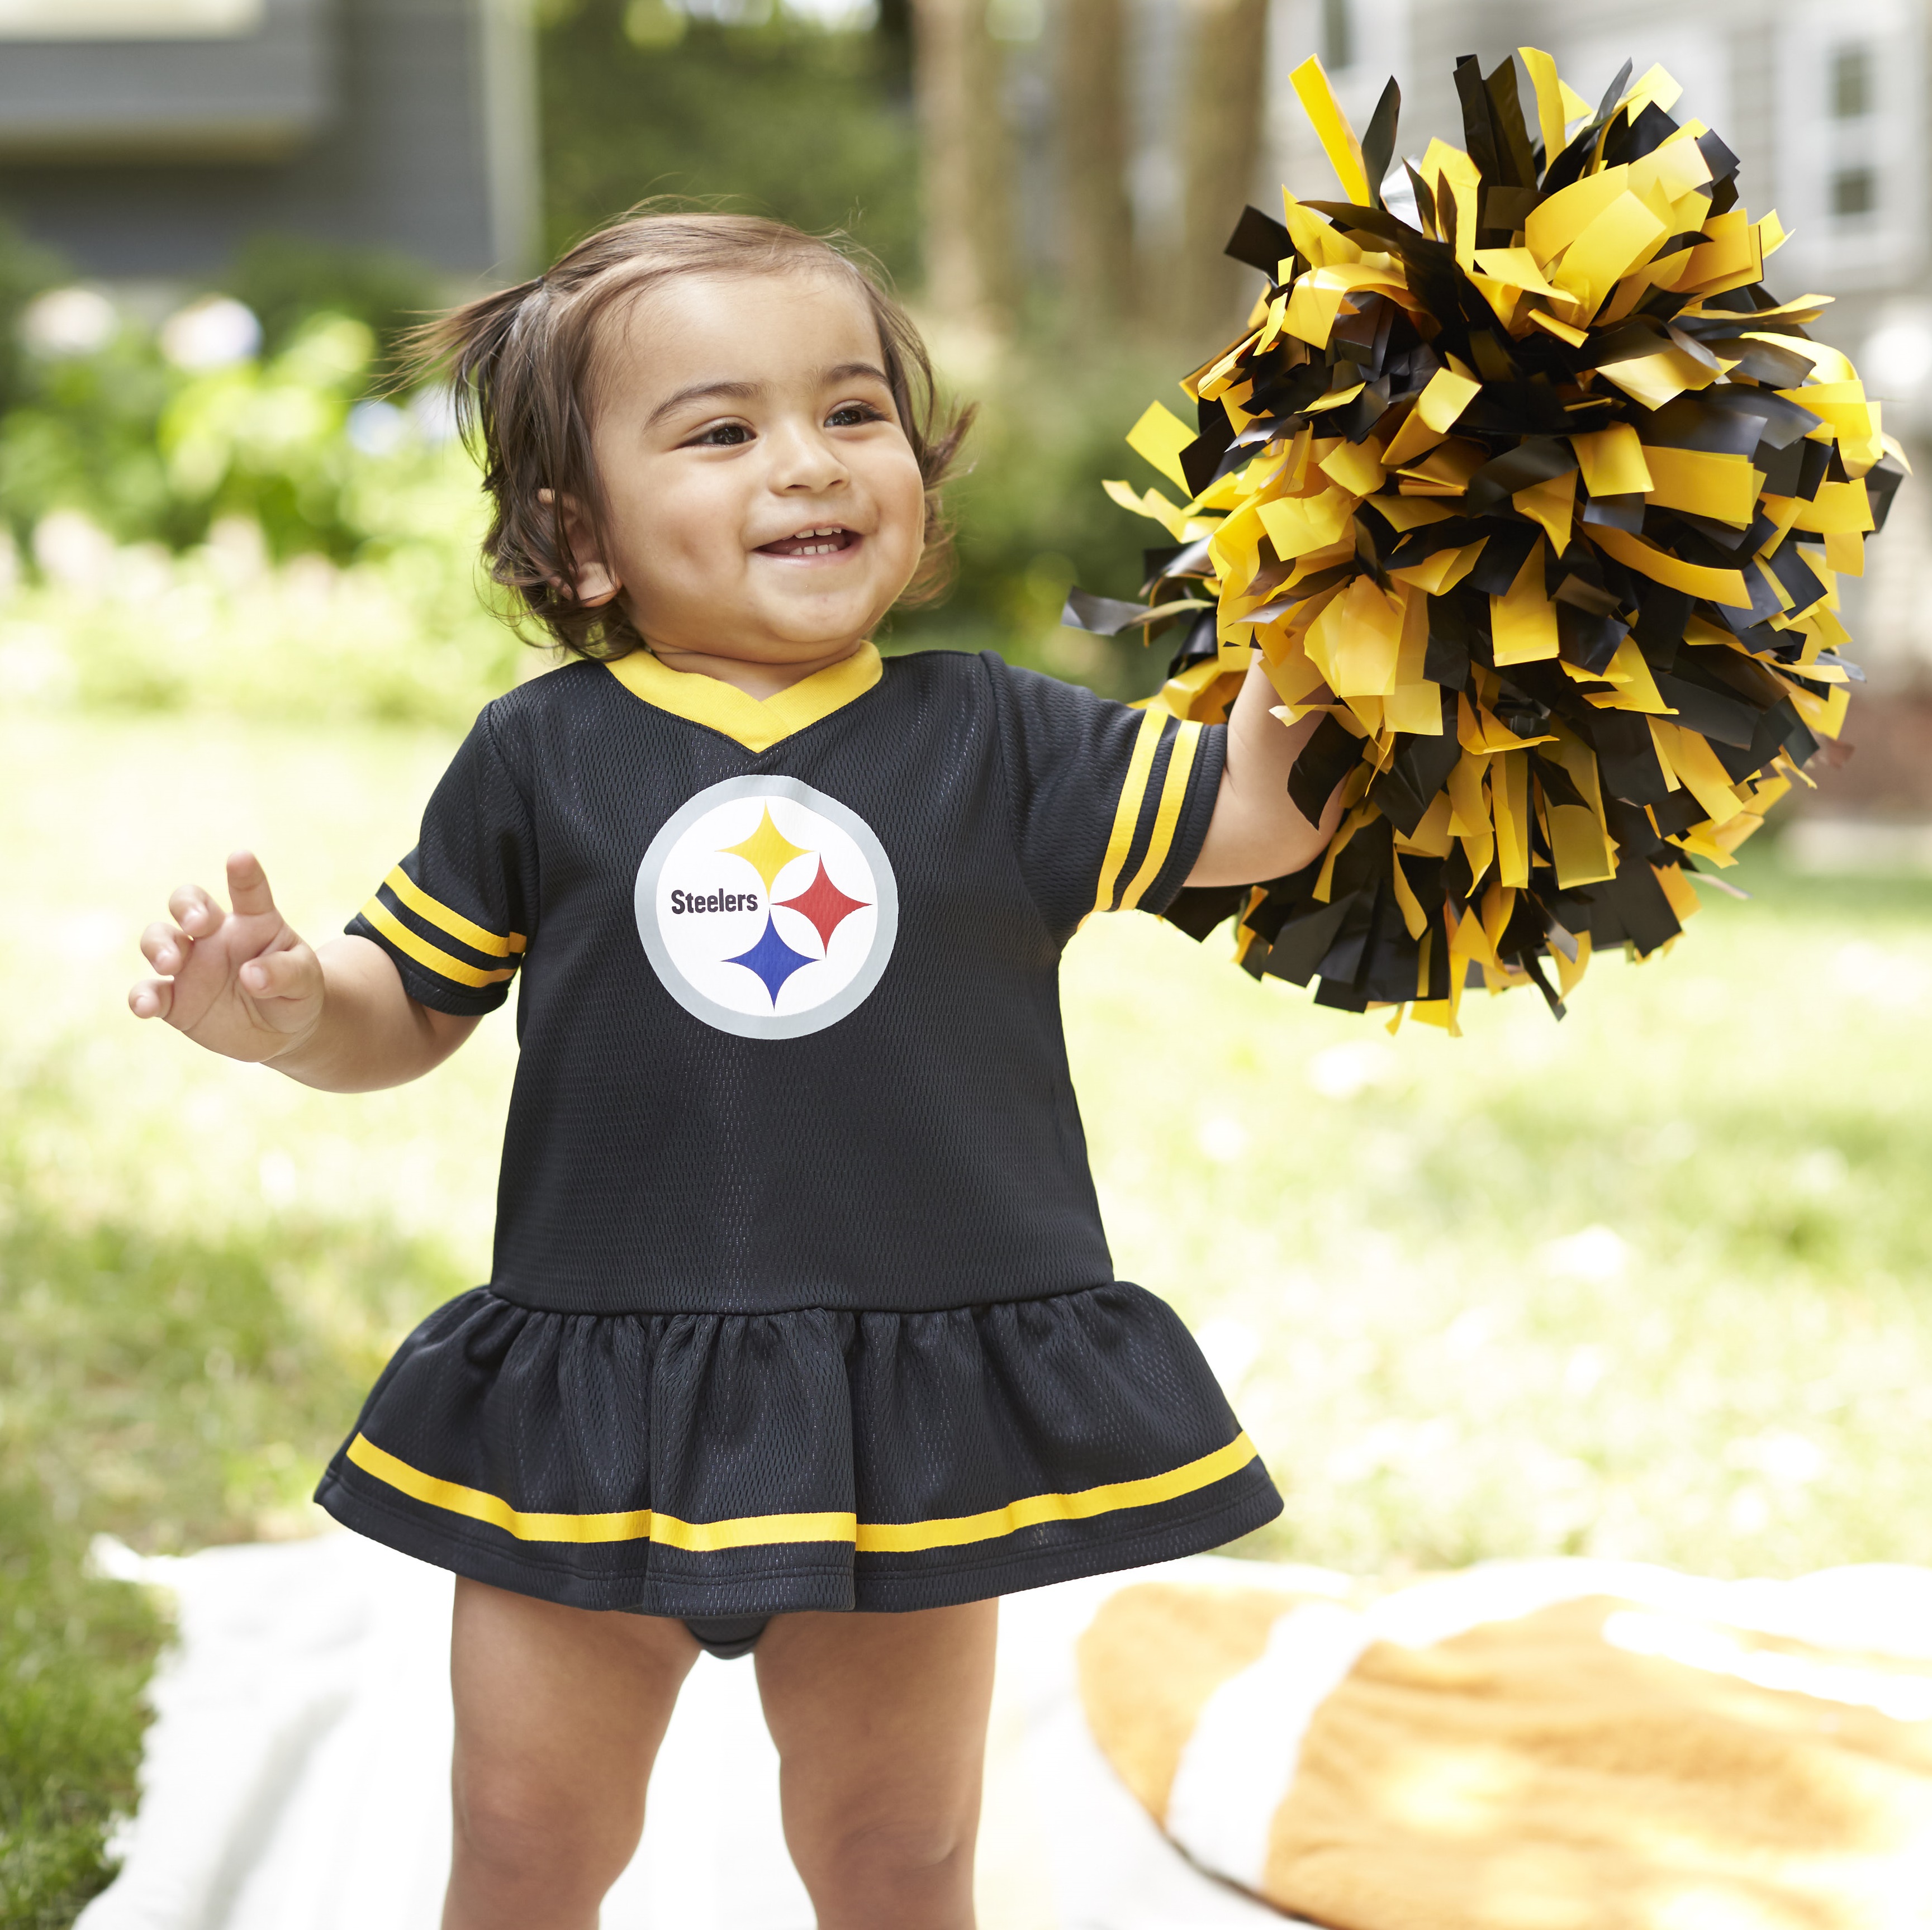 Steelers Player Jersey Baby Dress & Diaper Cover Set